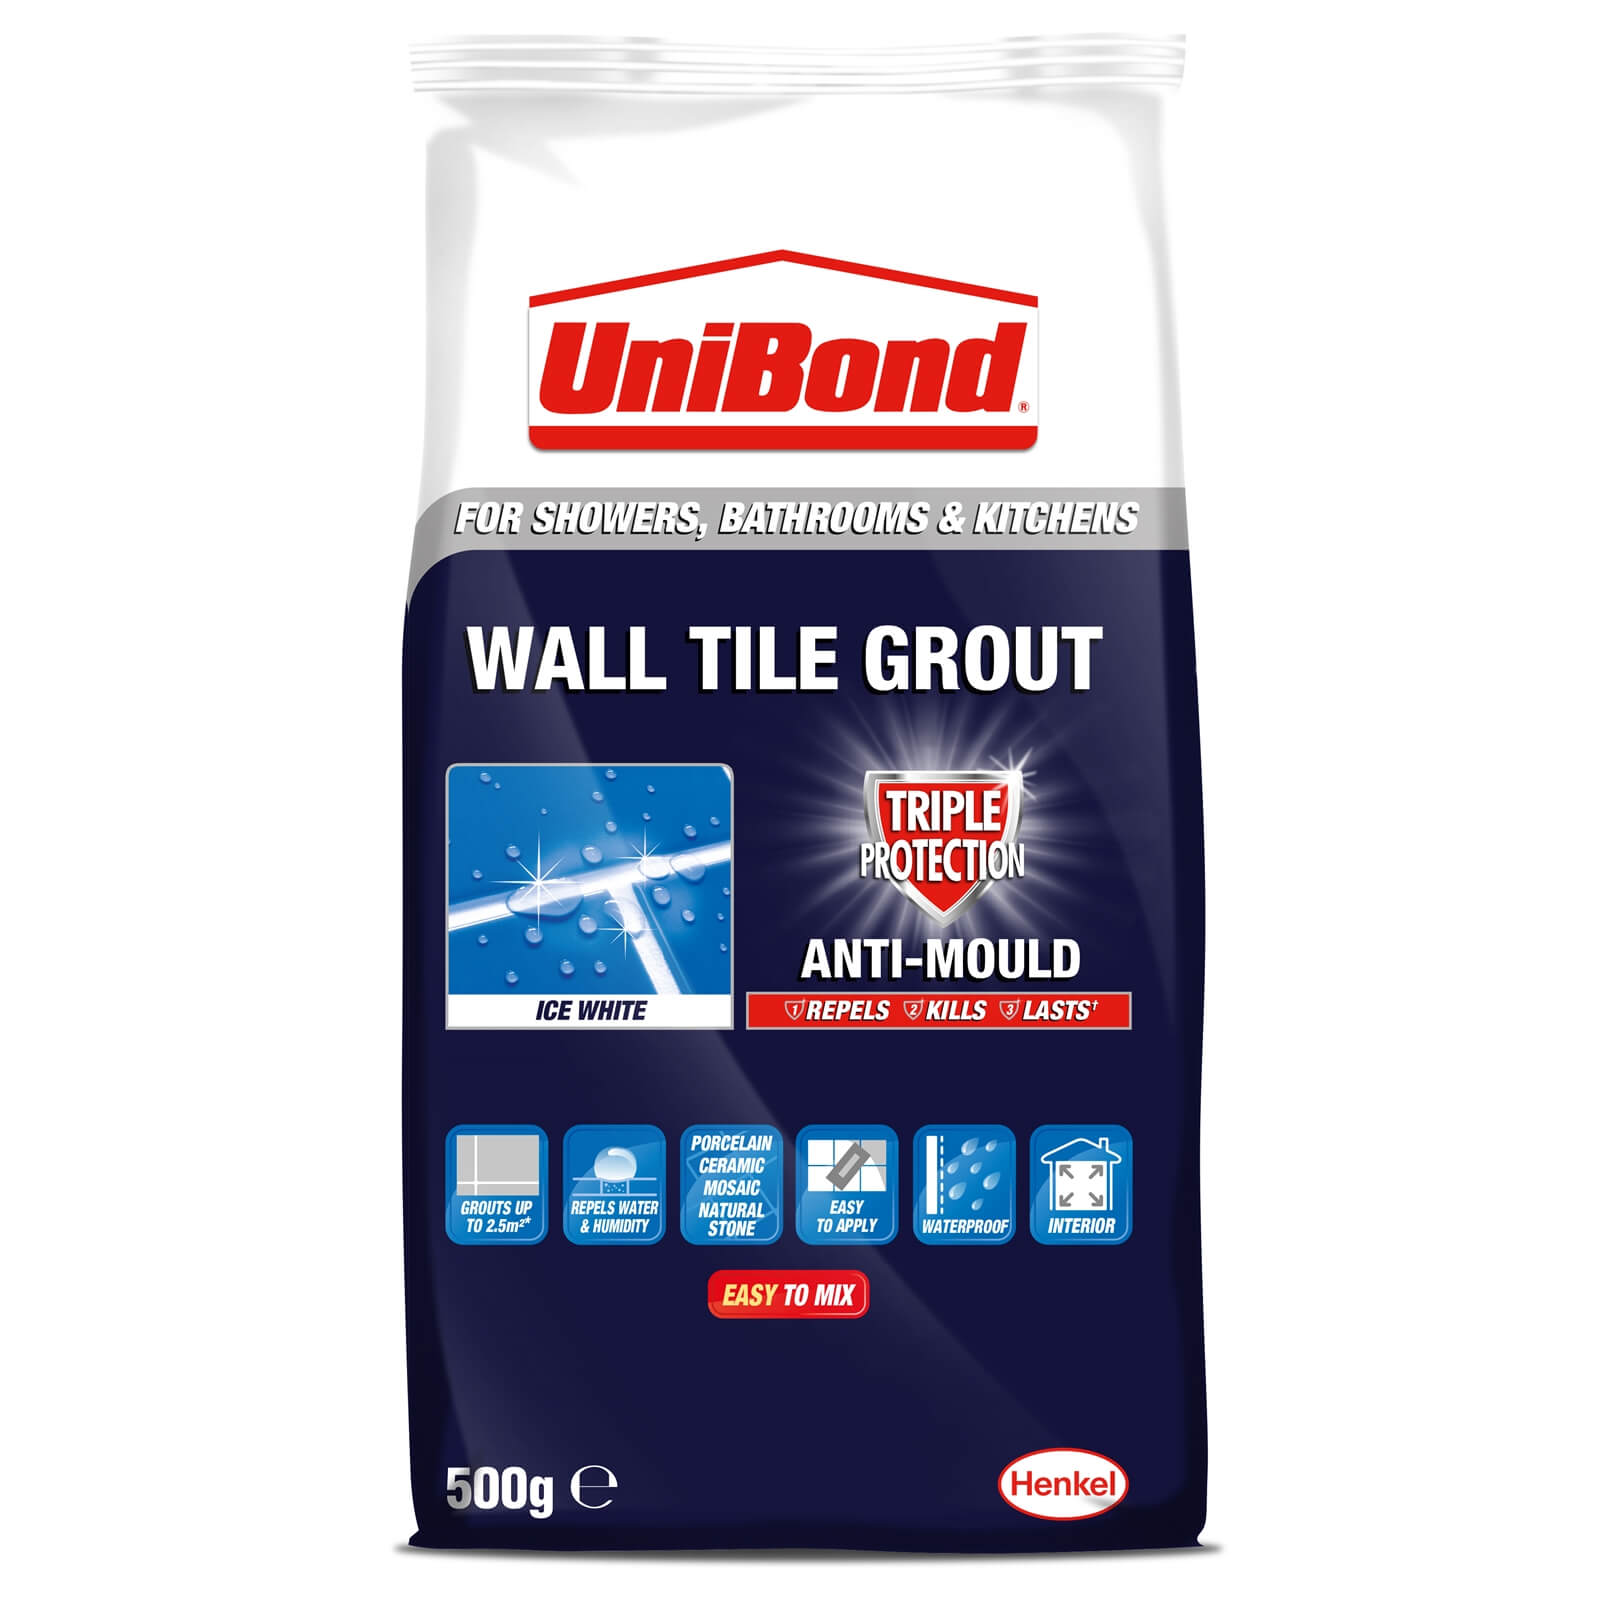 UniBond Triple Protection Anti-Mould Wall Tile Grout - Ice White